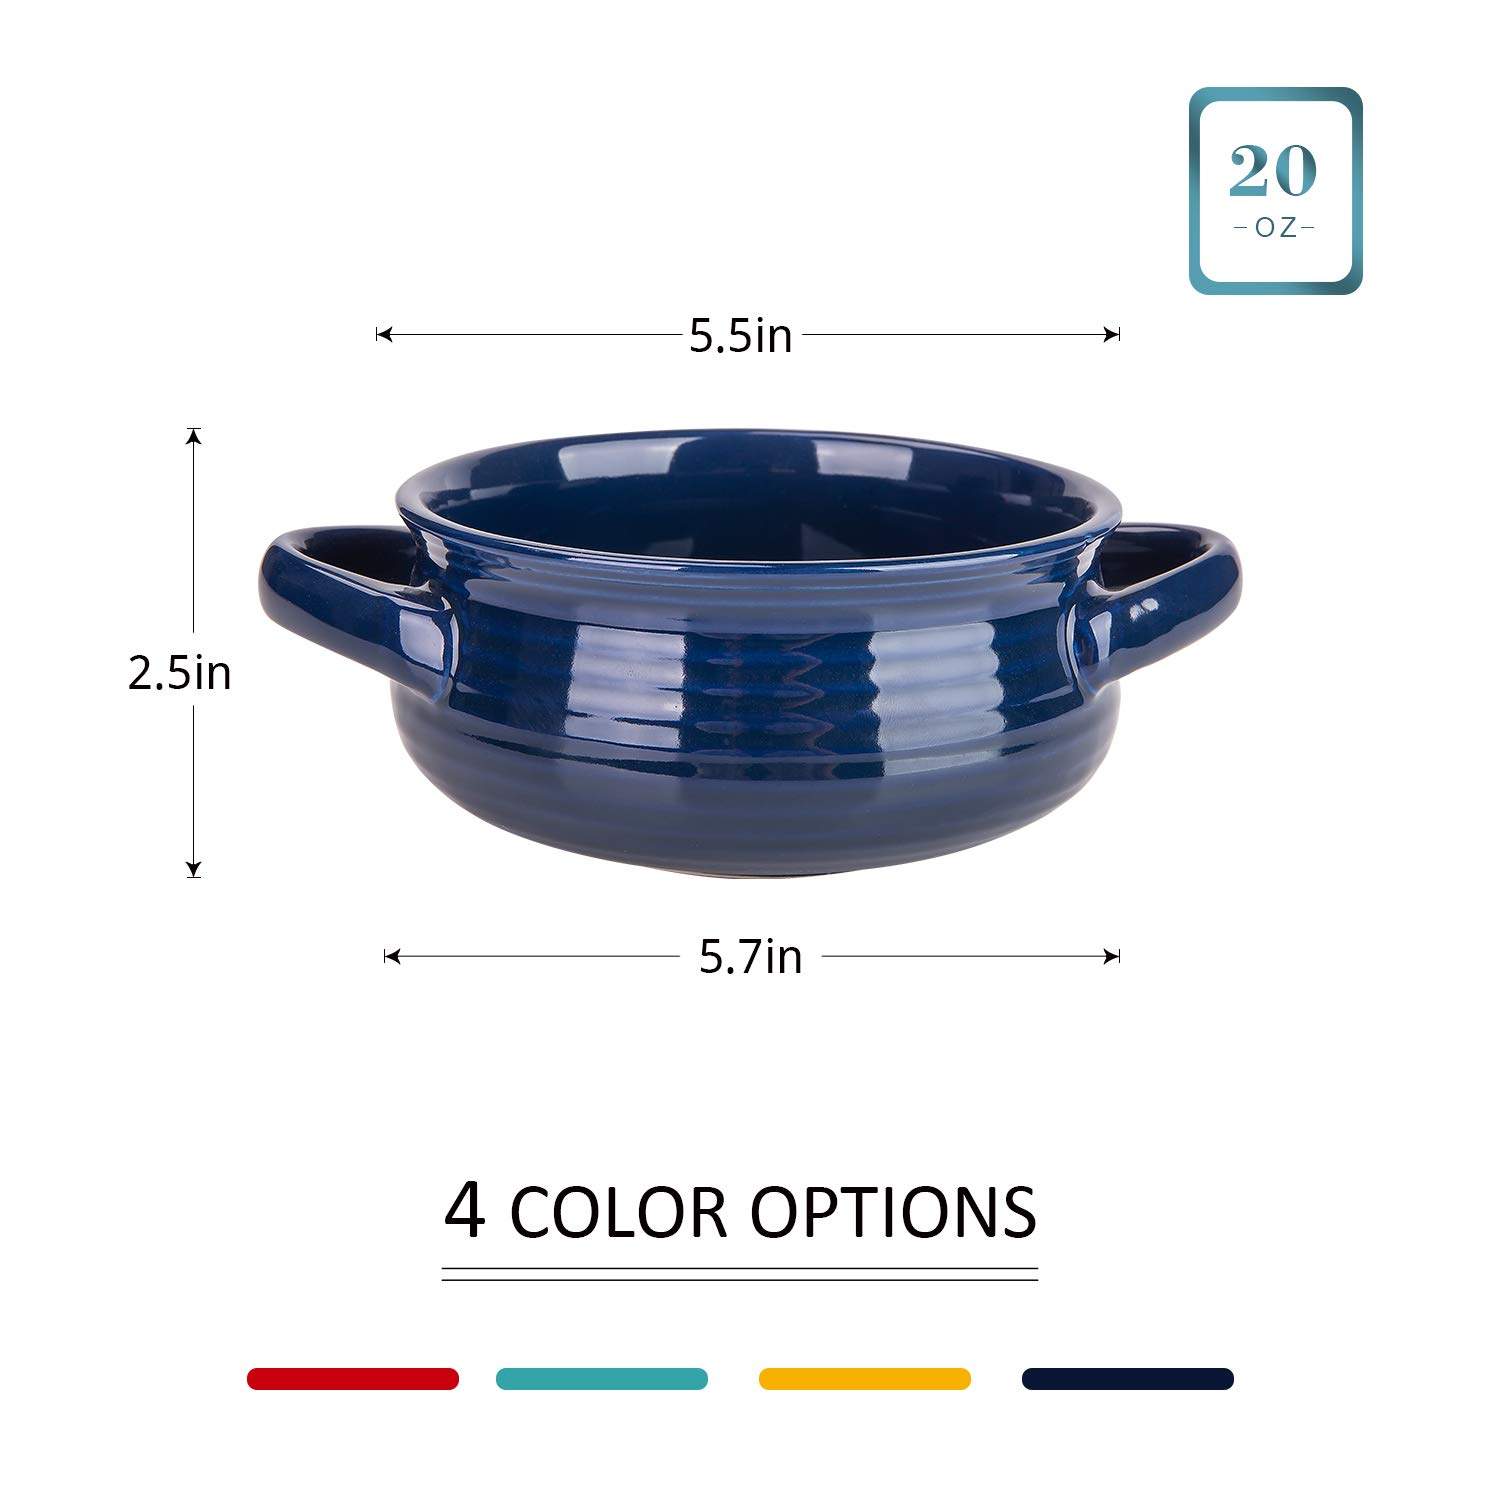 Cutiset 20 Ounce Multicolor Ceramic Soup Bowls with Handles,Ceramic Serving Bowl Set for Soup, Cereal and Stew, Set of 4